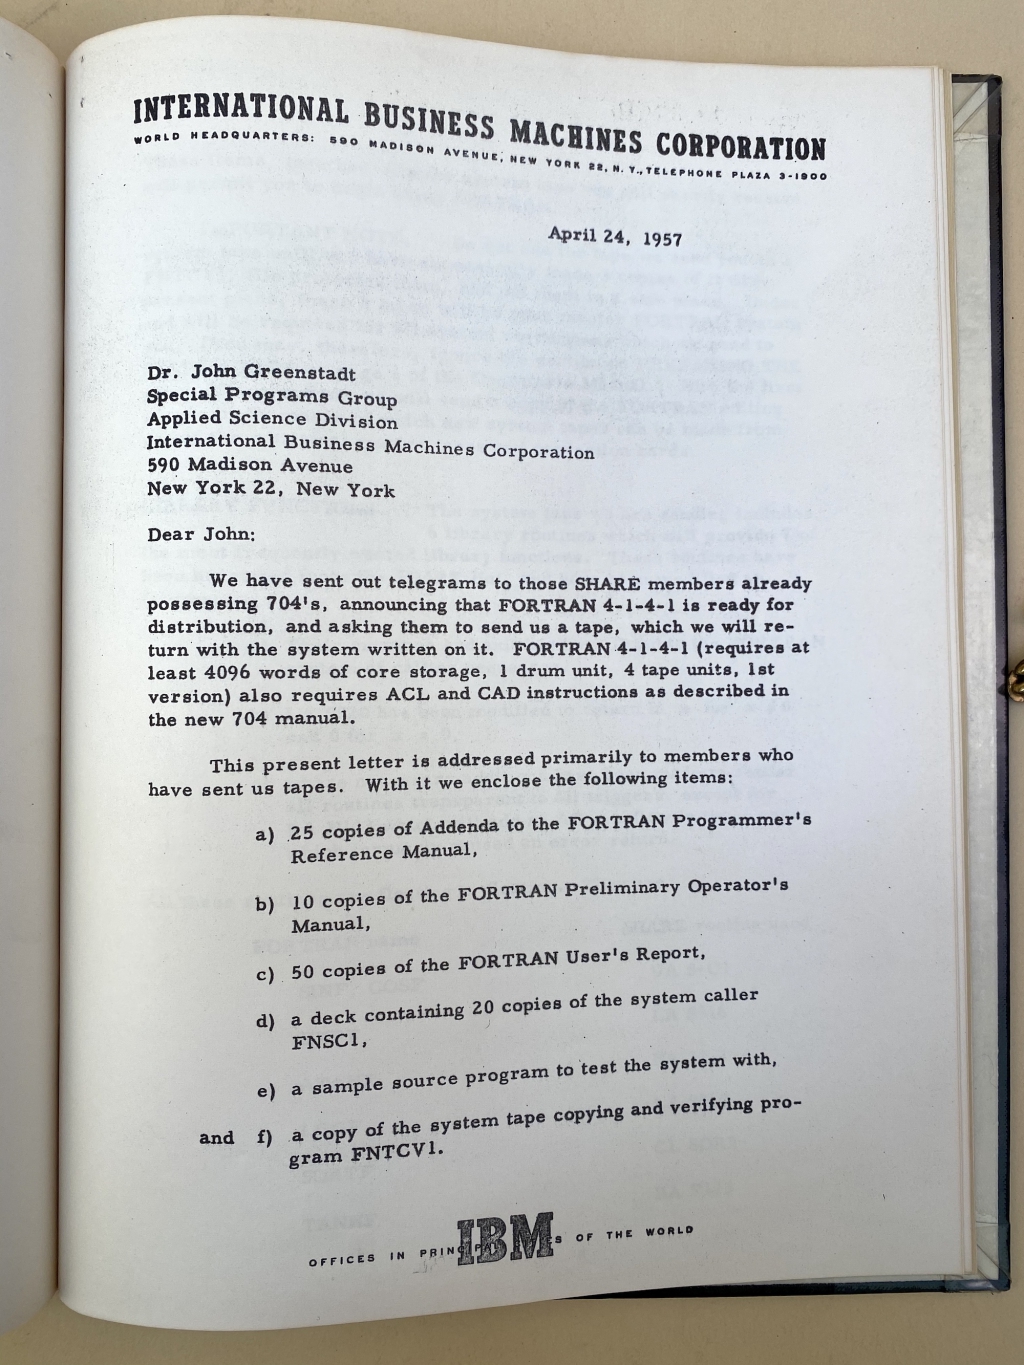 Letter from Backus distributing preliminary Fortran documents